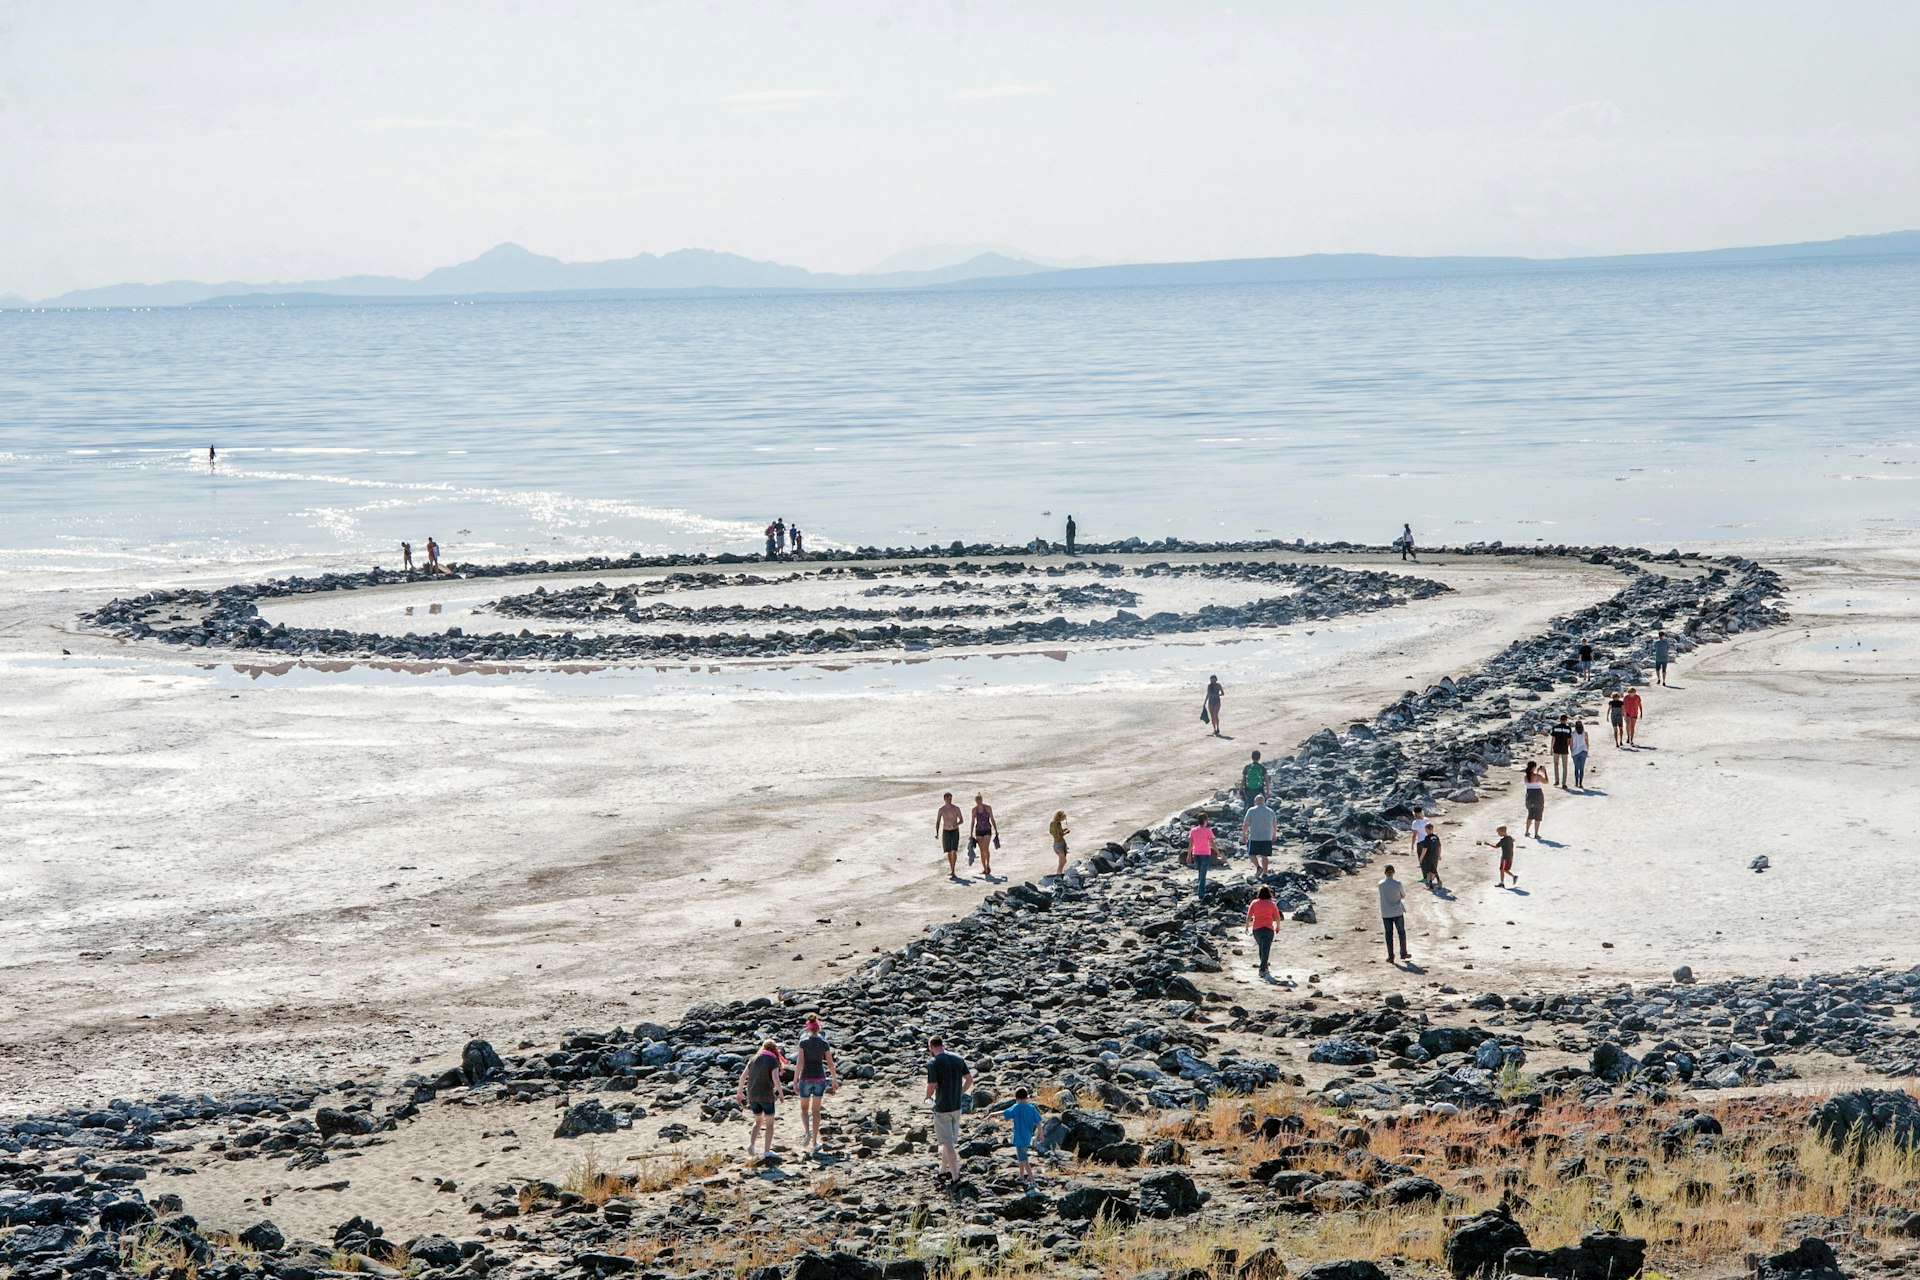 Spiral Jetty is an earthwork sculpture constructed in April 1970 that is considered to be the most important work of American sculptor Robert Smithson